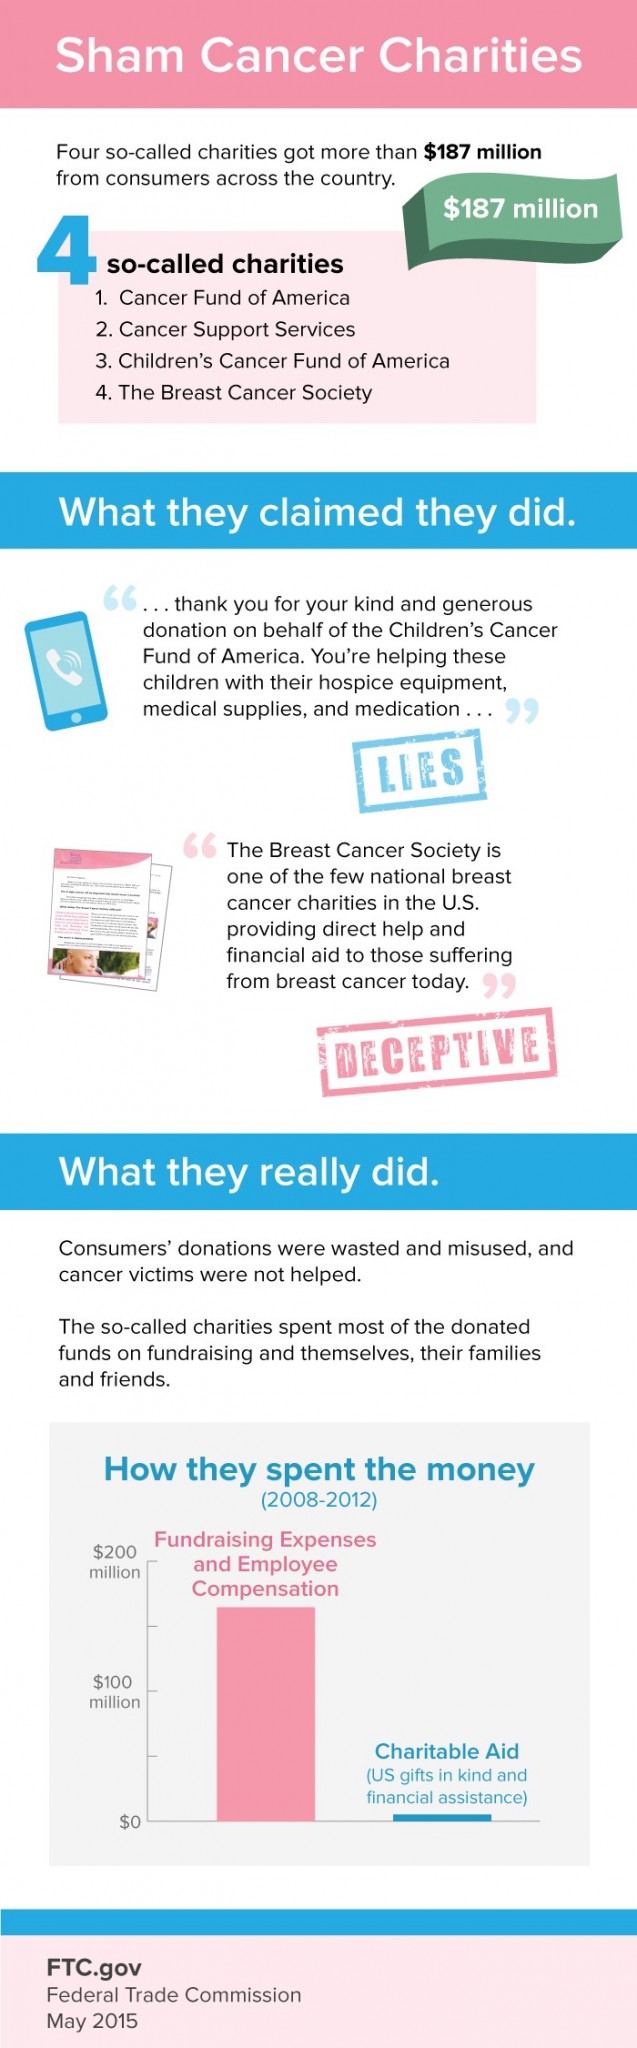 sham-cancer-charities-infographic-700px